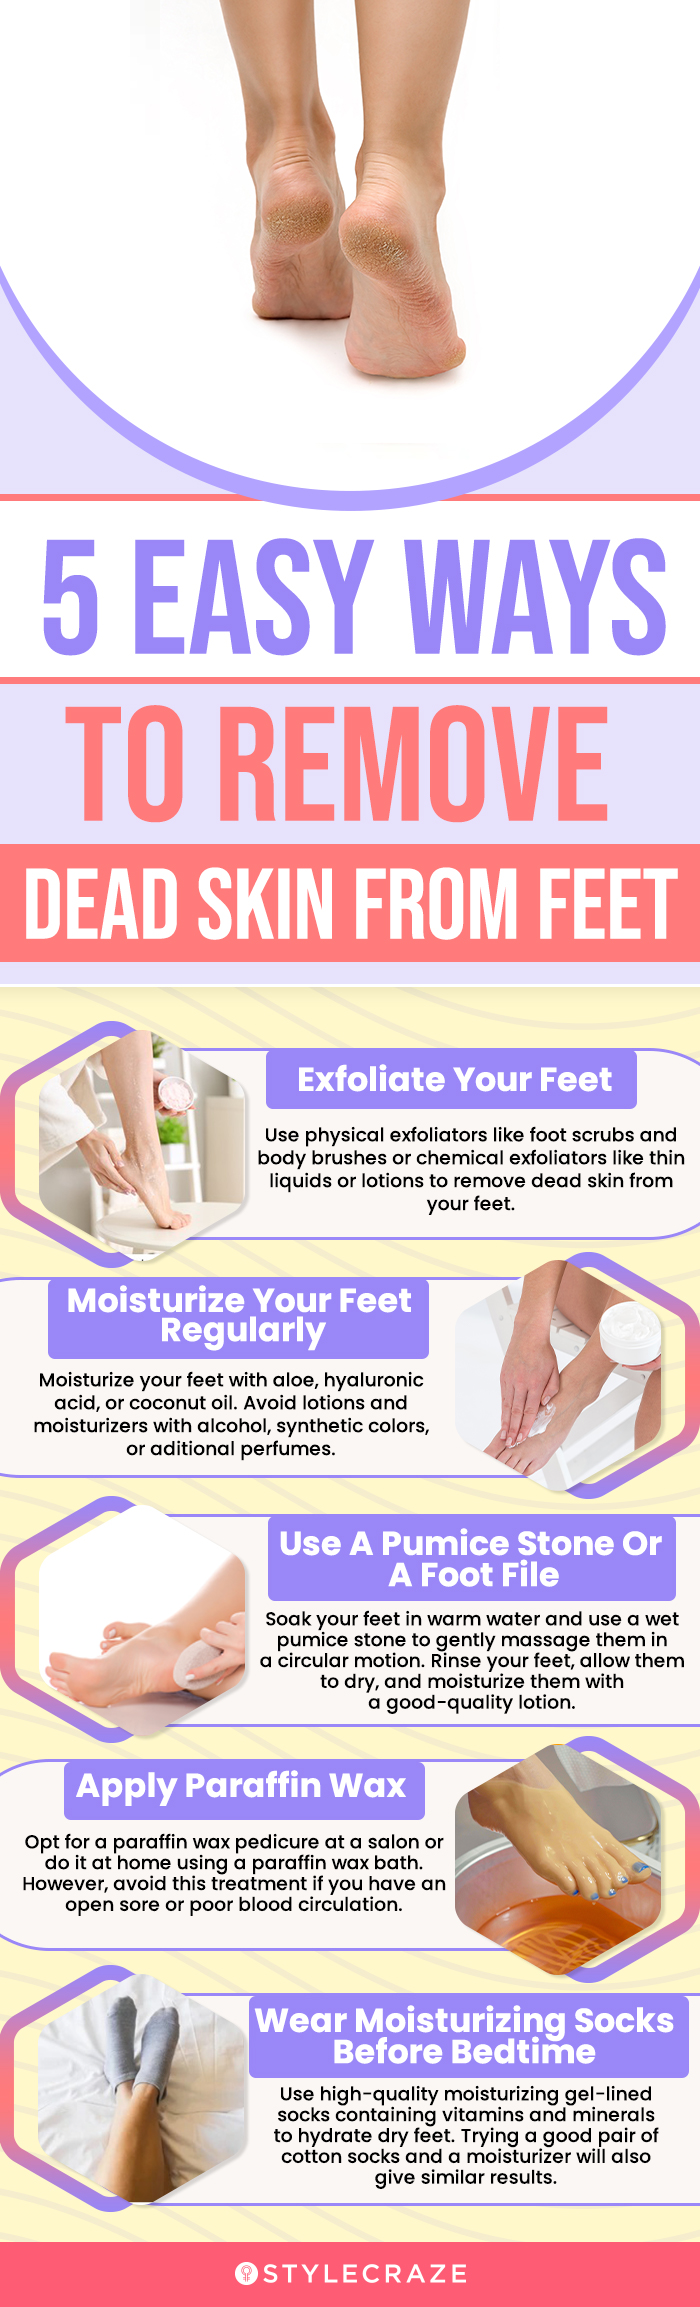 5 easy ways to remove dead skin from feet (infographic)